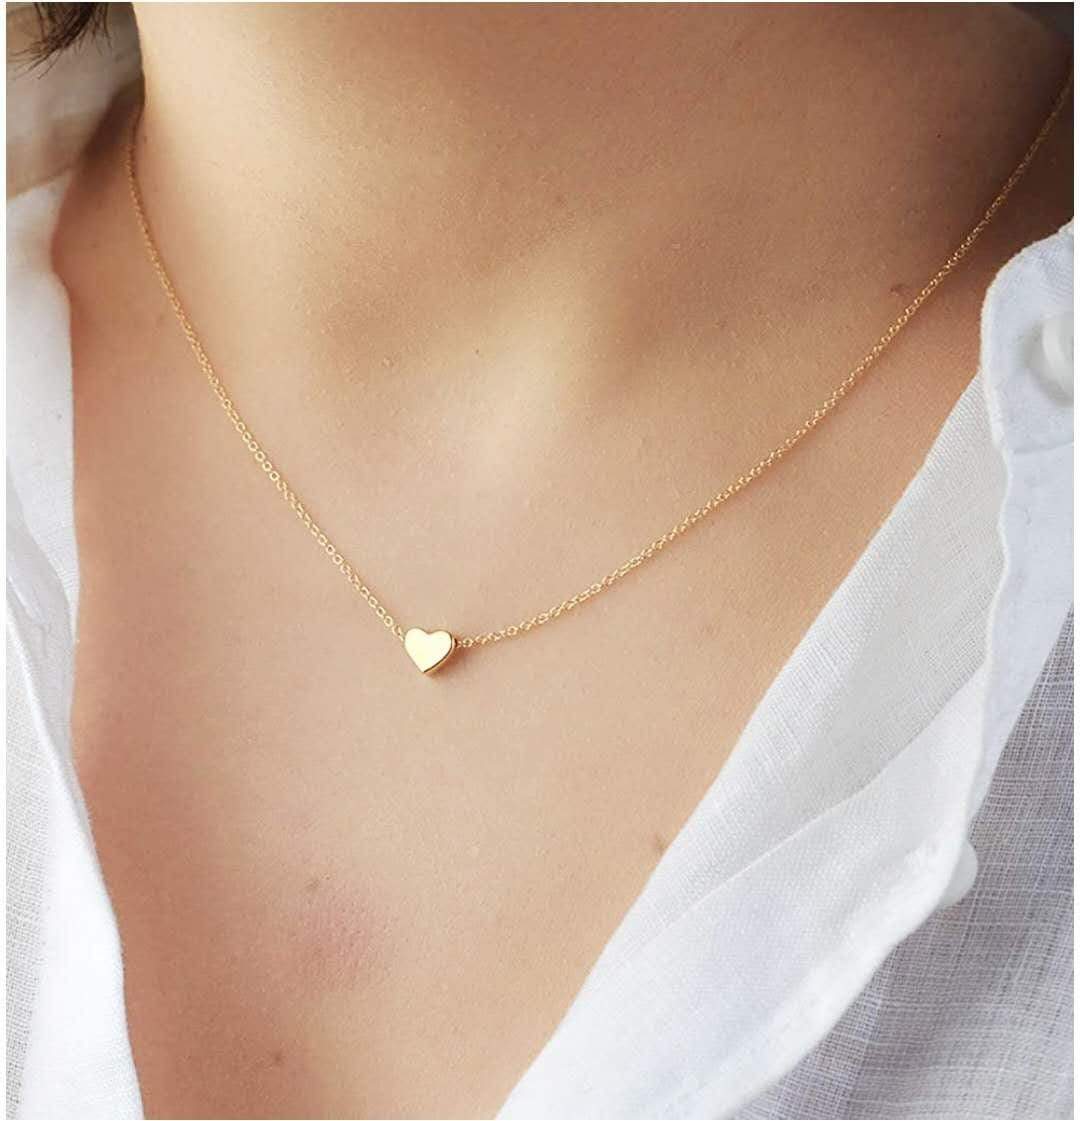 Dainty Gold Silver Tone Heart Necklace - Initial Heart Charm Necklace - Tiny Heart Pendant Necklace - Gold